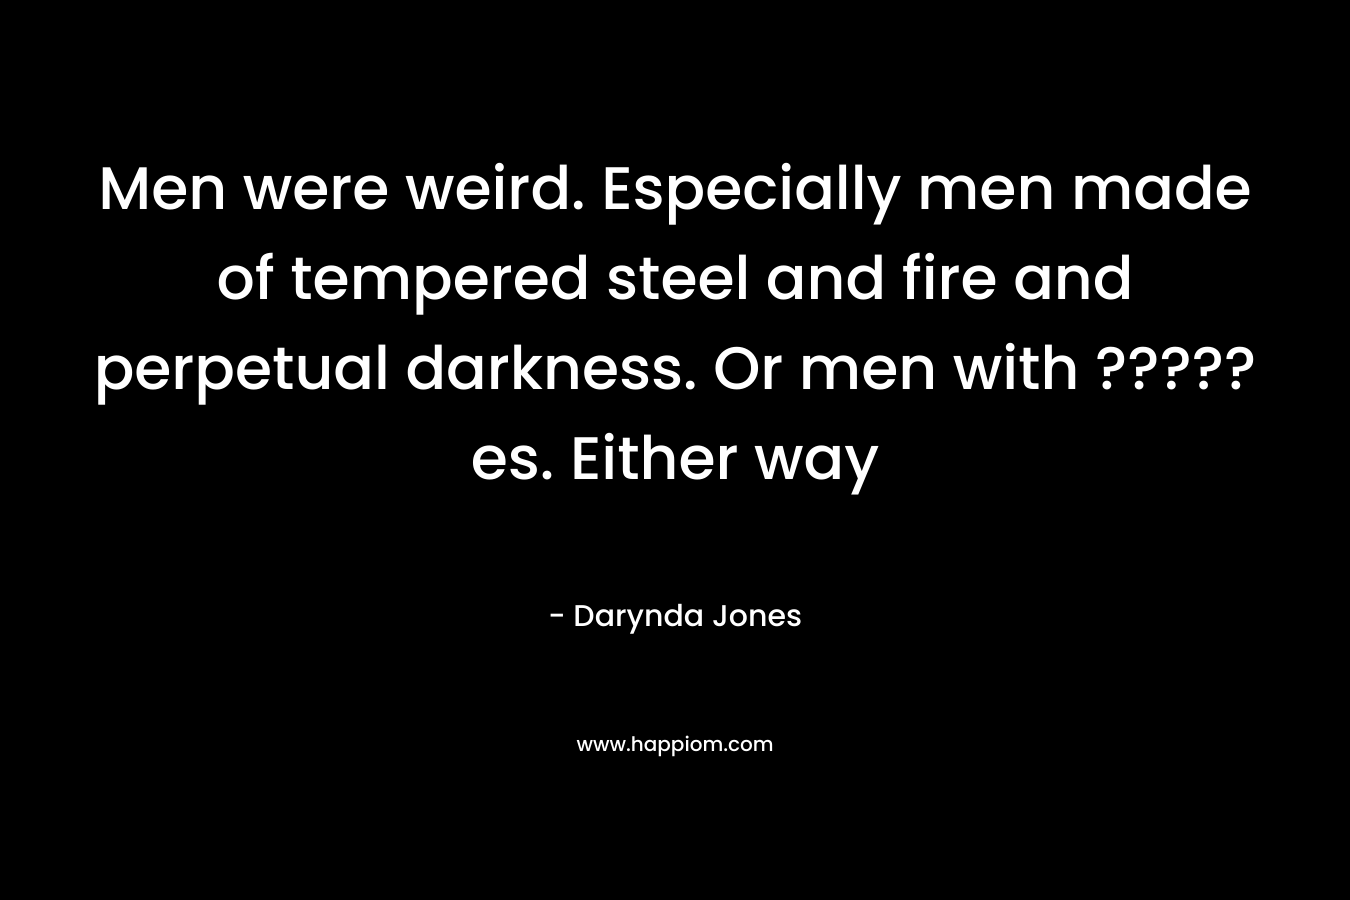 Men were weird. Especially men made of tempered steel and fire and perpetual darkness. Or men with ?????es. Either way – Darynda Jones